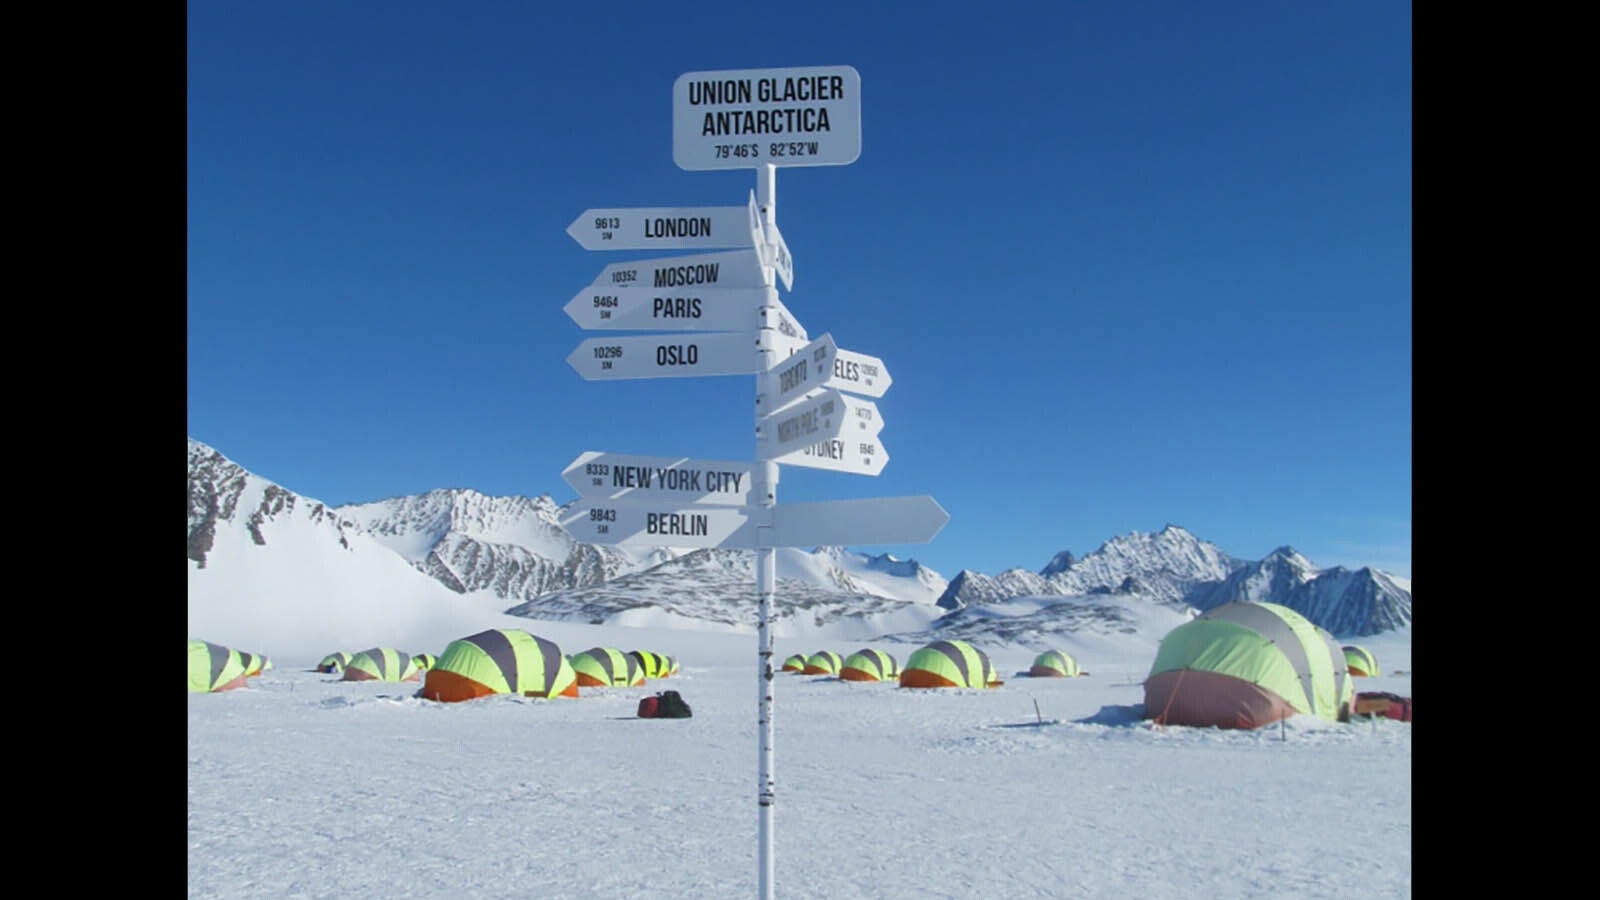 Union Glacier in Antarctica is a launching point for expeditions to summit Mount Vinson.